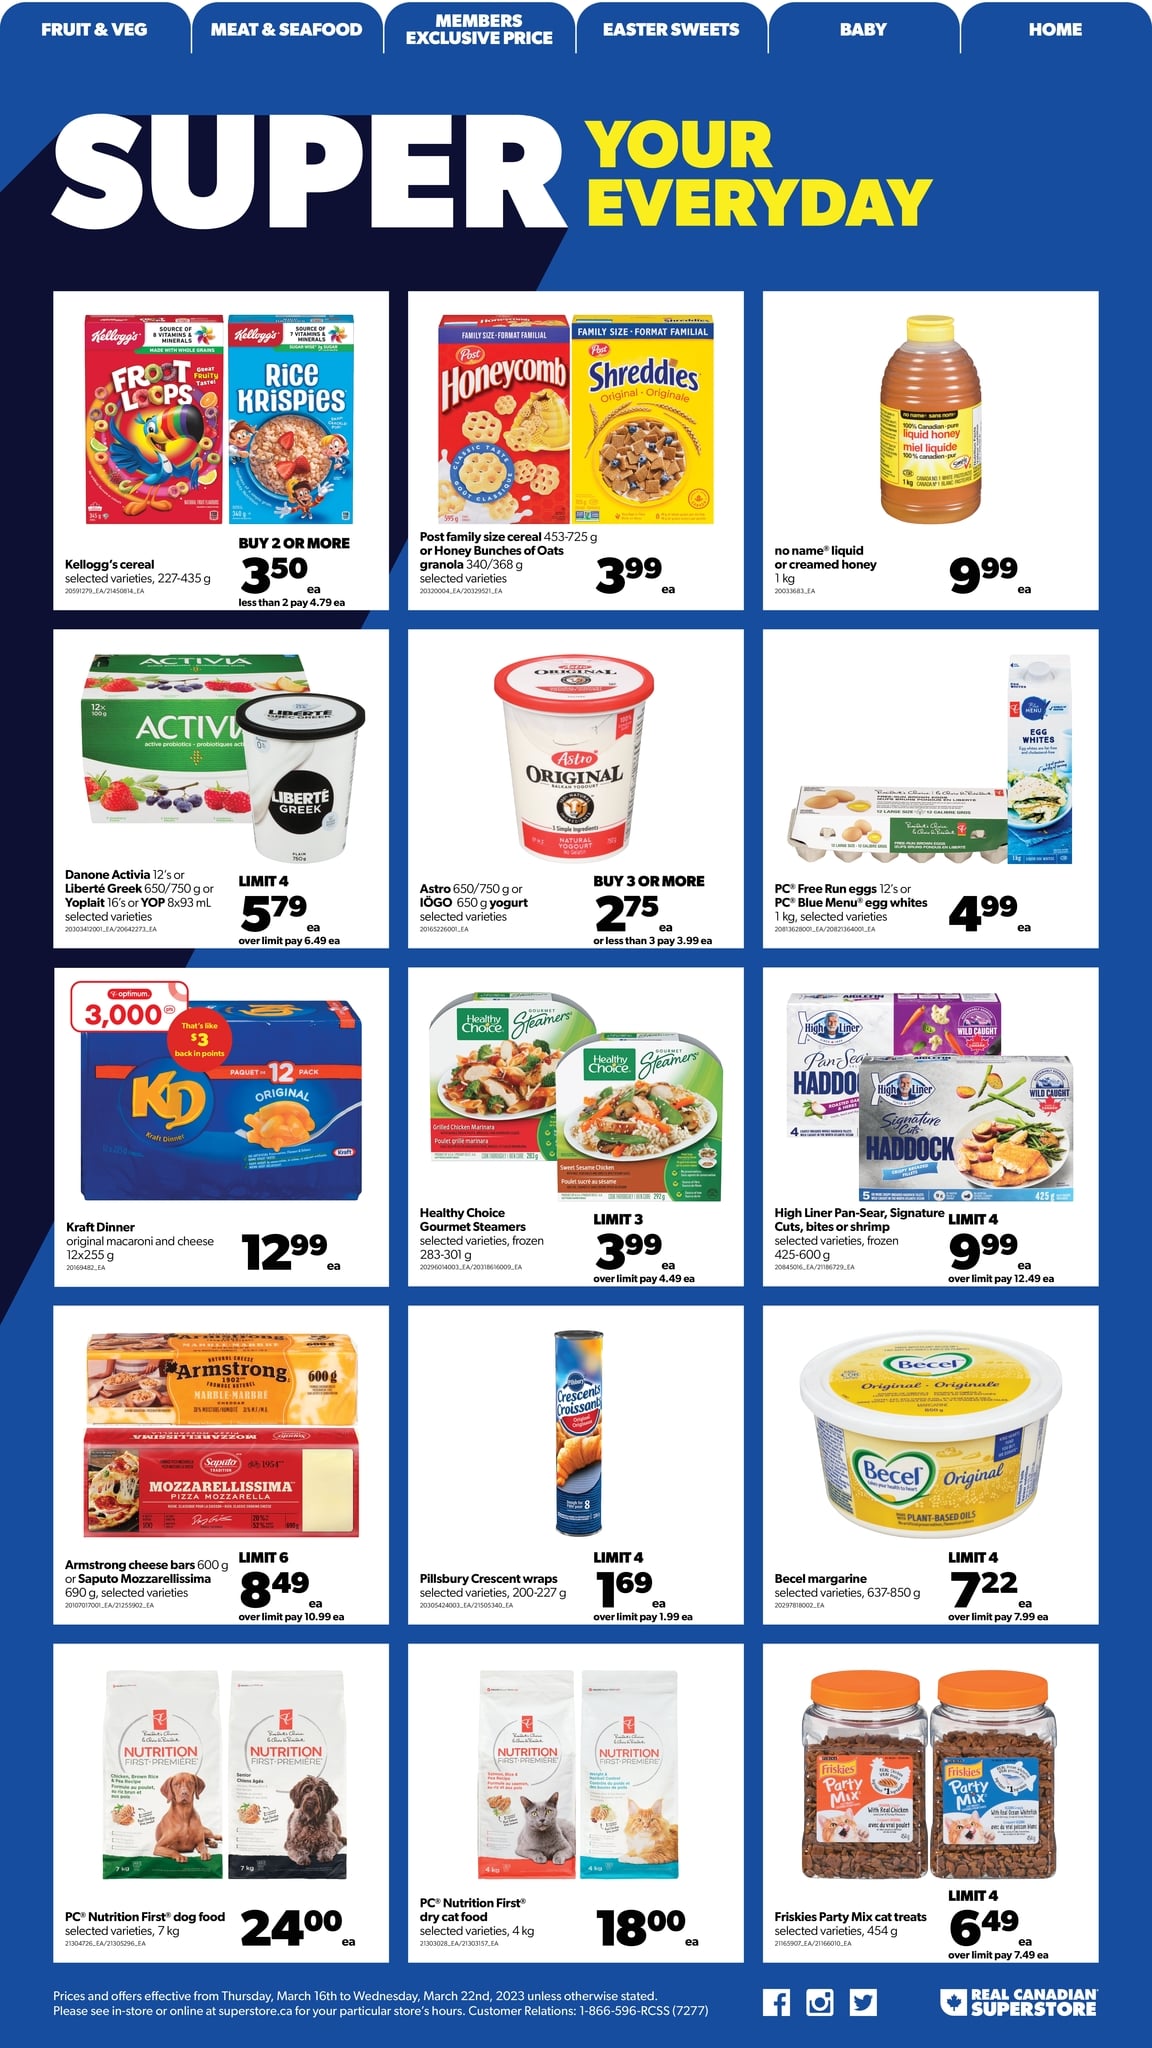 Real Canadian Superstore - Ontario - Weekly Flyer Specials - Page 12